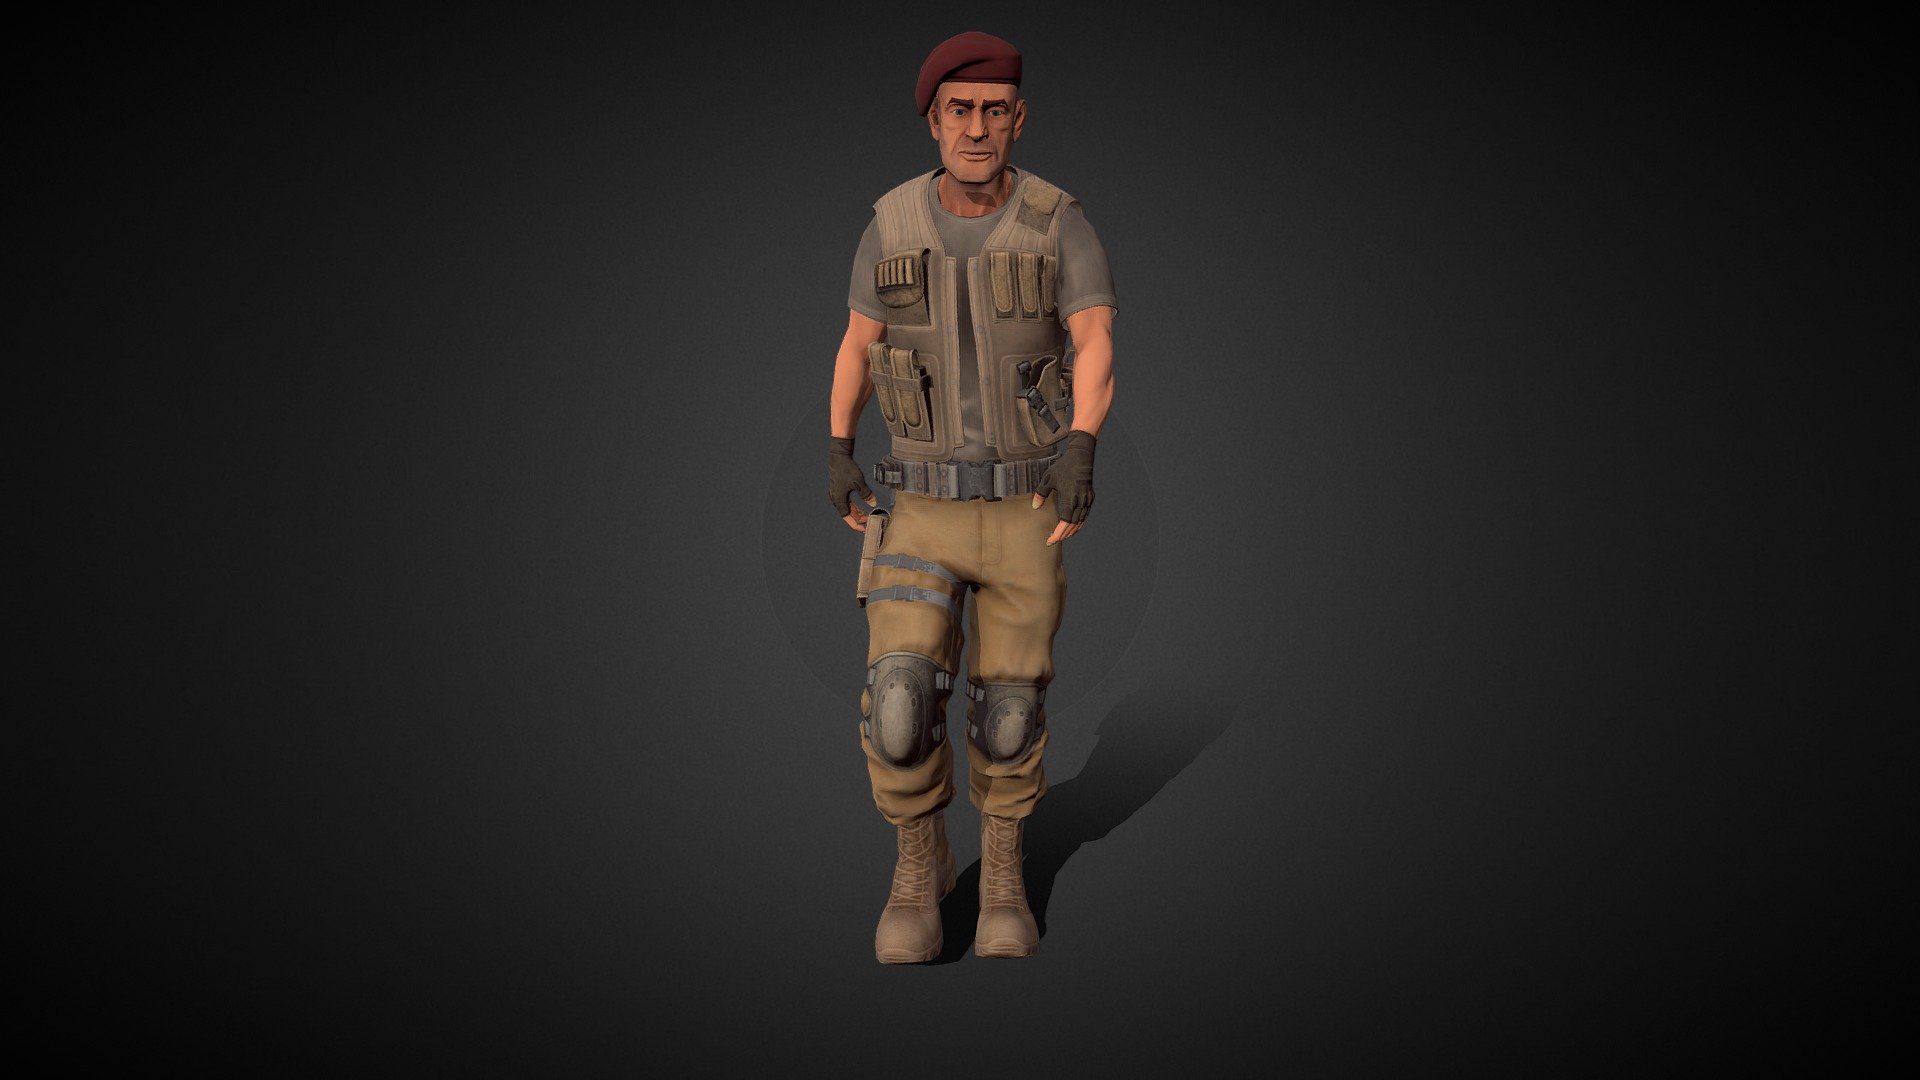 23 K tris low poly rigged skinned Commando character.

Character uses mixamo rig and it came with 5 simple mixamo animation

idle1,idle2,walk,run,jump

if you want more animation you can download from mixamo and add to character.

4096x4096 pbr texture sets.3 uv set-3 material.Head,west,pant.

Unity project with full material animation setup ready.

5 different skin 5 different berret setup.

Black ops

Woodland

UCP

UCPused

Desert fox

Black beret

green beret

blue beret

Bordoux Beret.

cgtradercom/3d-models/character/man/commando-set - Commando - 3D model by 3DBazaar (@muratosan) 3d model